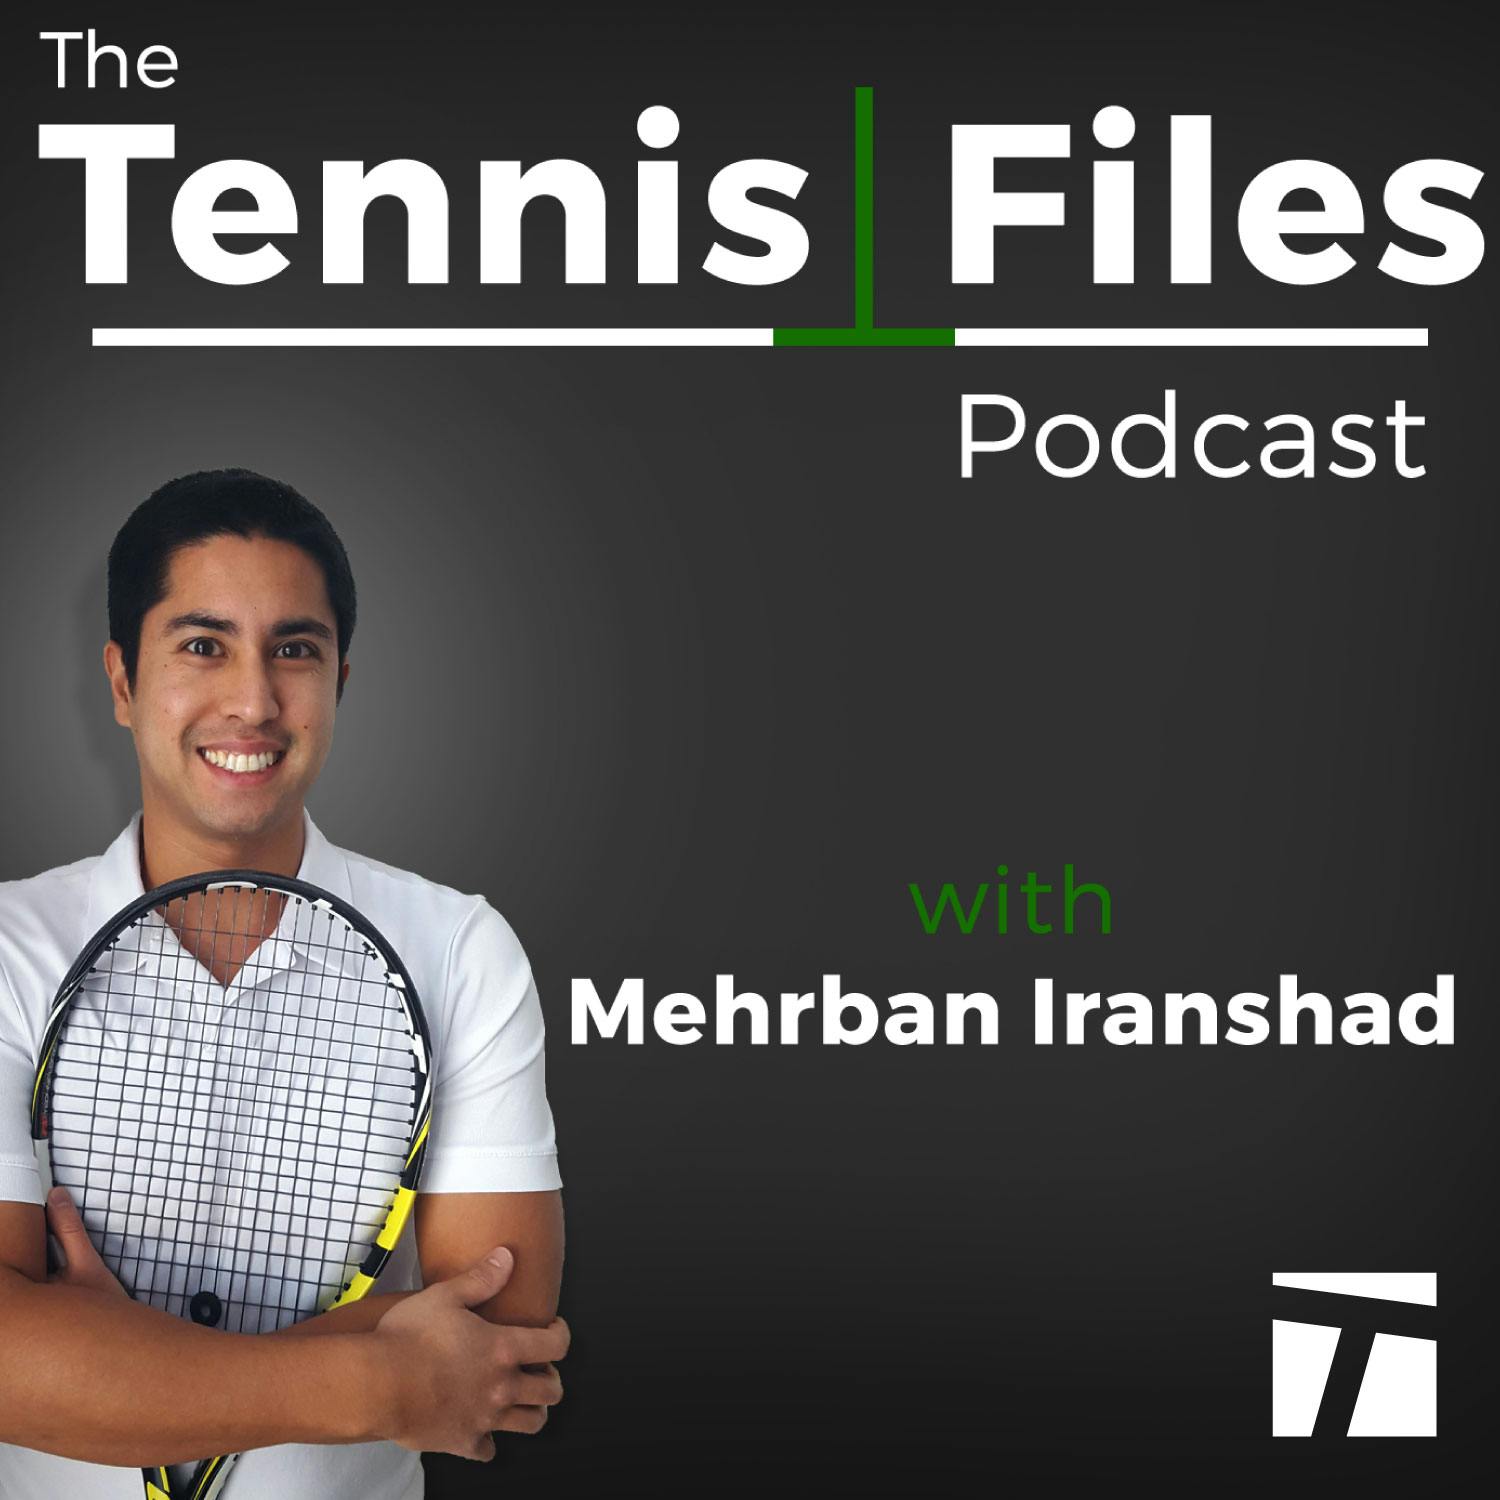 TFP 341: The 7 Most Impactful Changes That Transformed my Tennis Game - From the 2021 archives